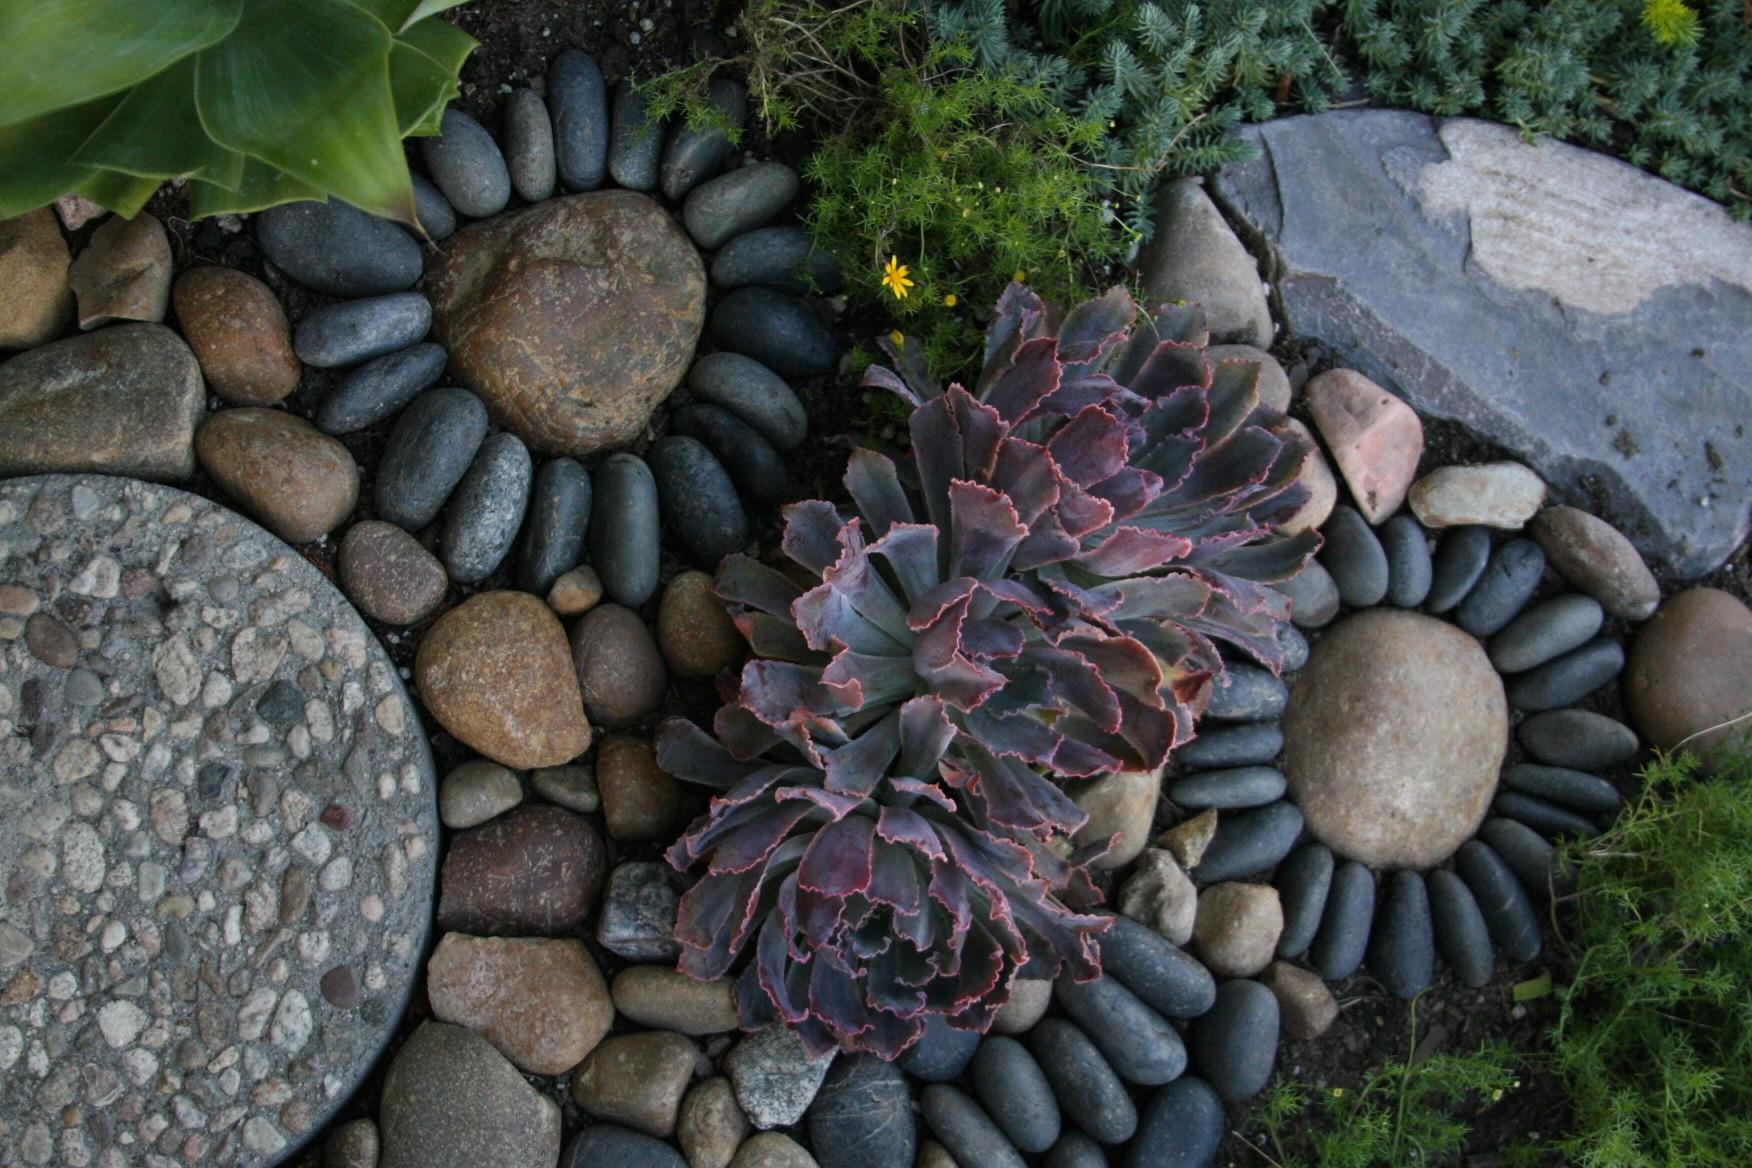 Rocks and pebbles of various sizes and colors make a rock garden surrounded by green plants.